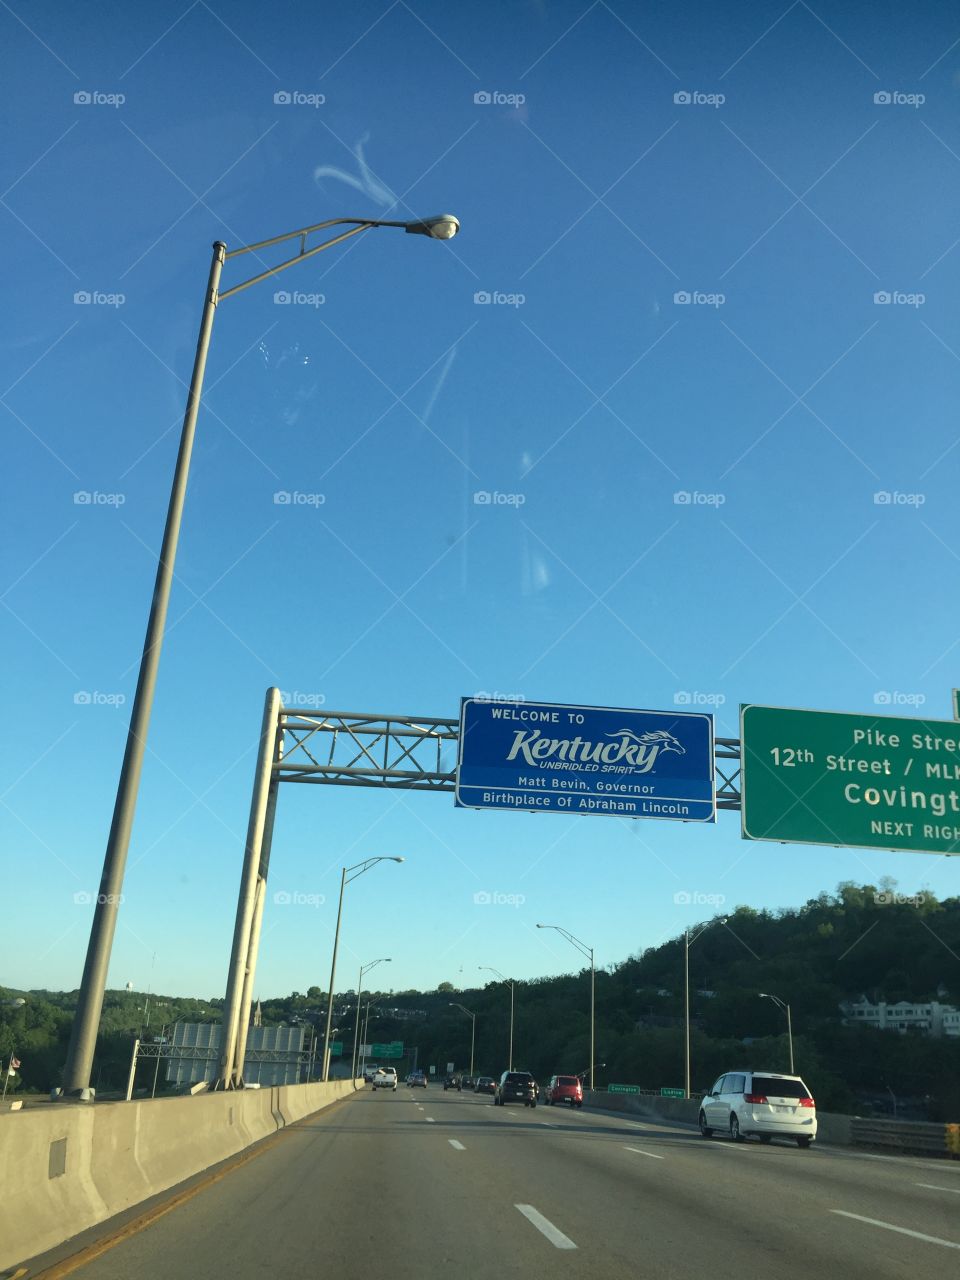 Kentucky welcome sign on interstate 75 